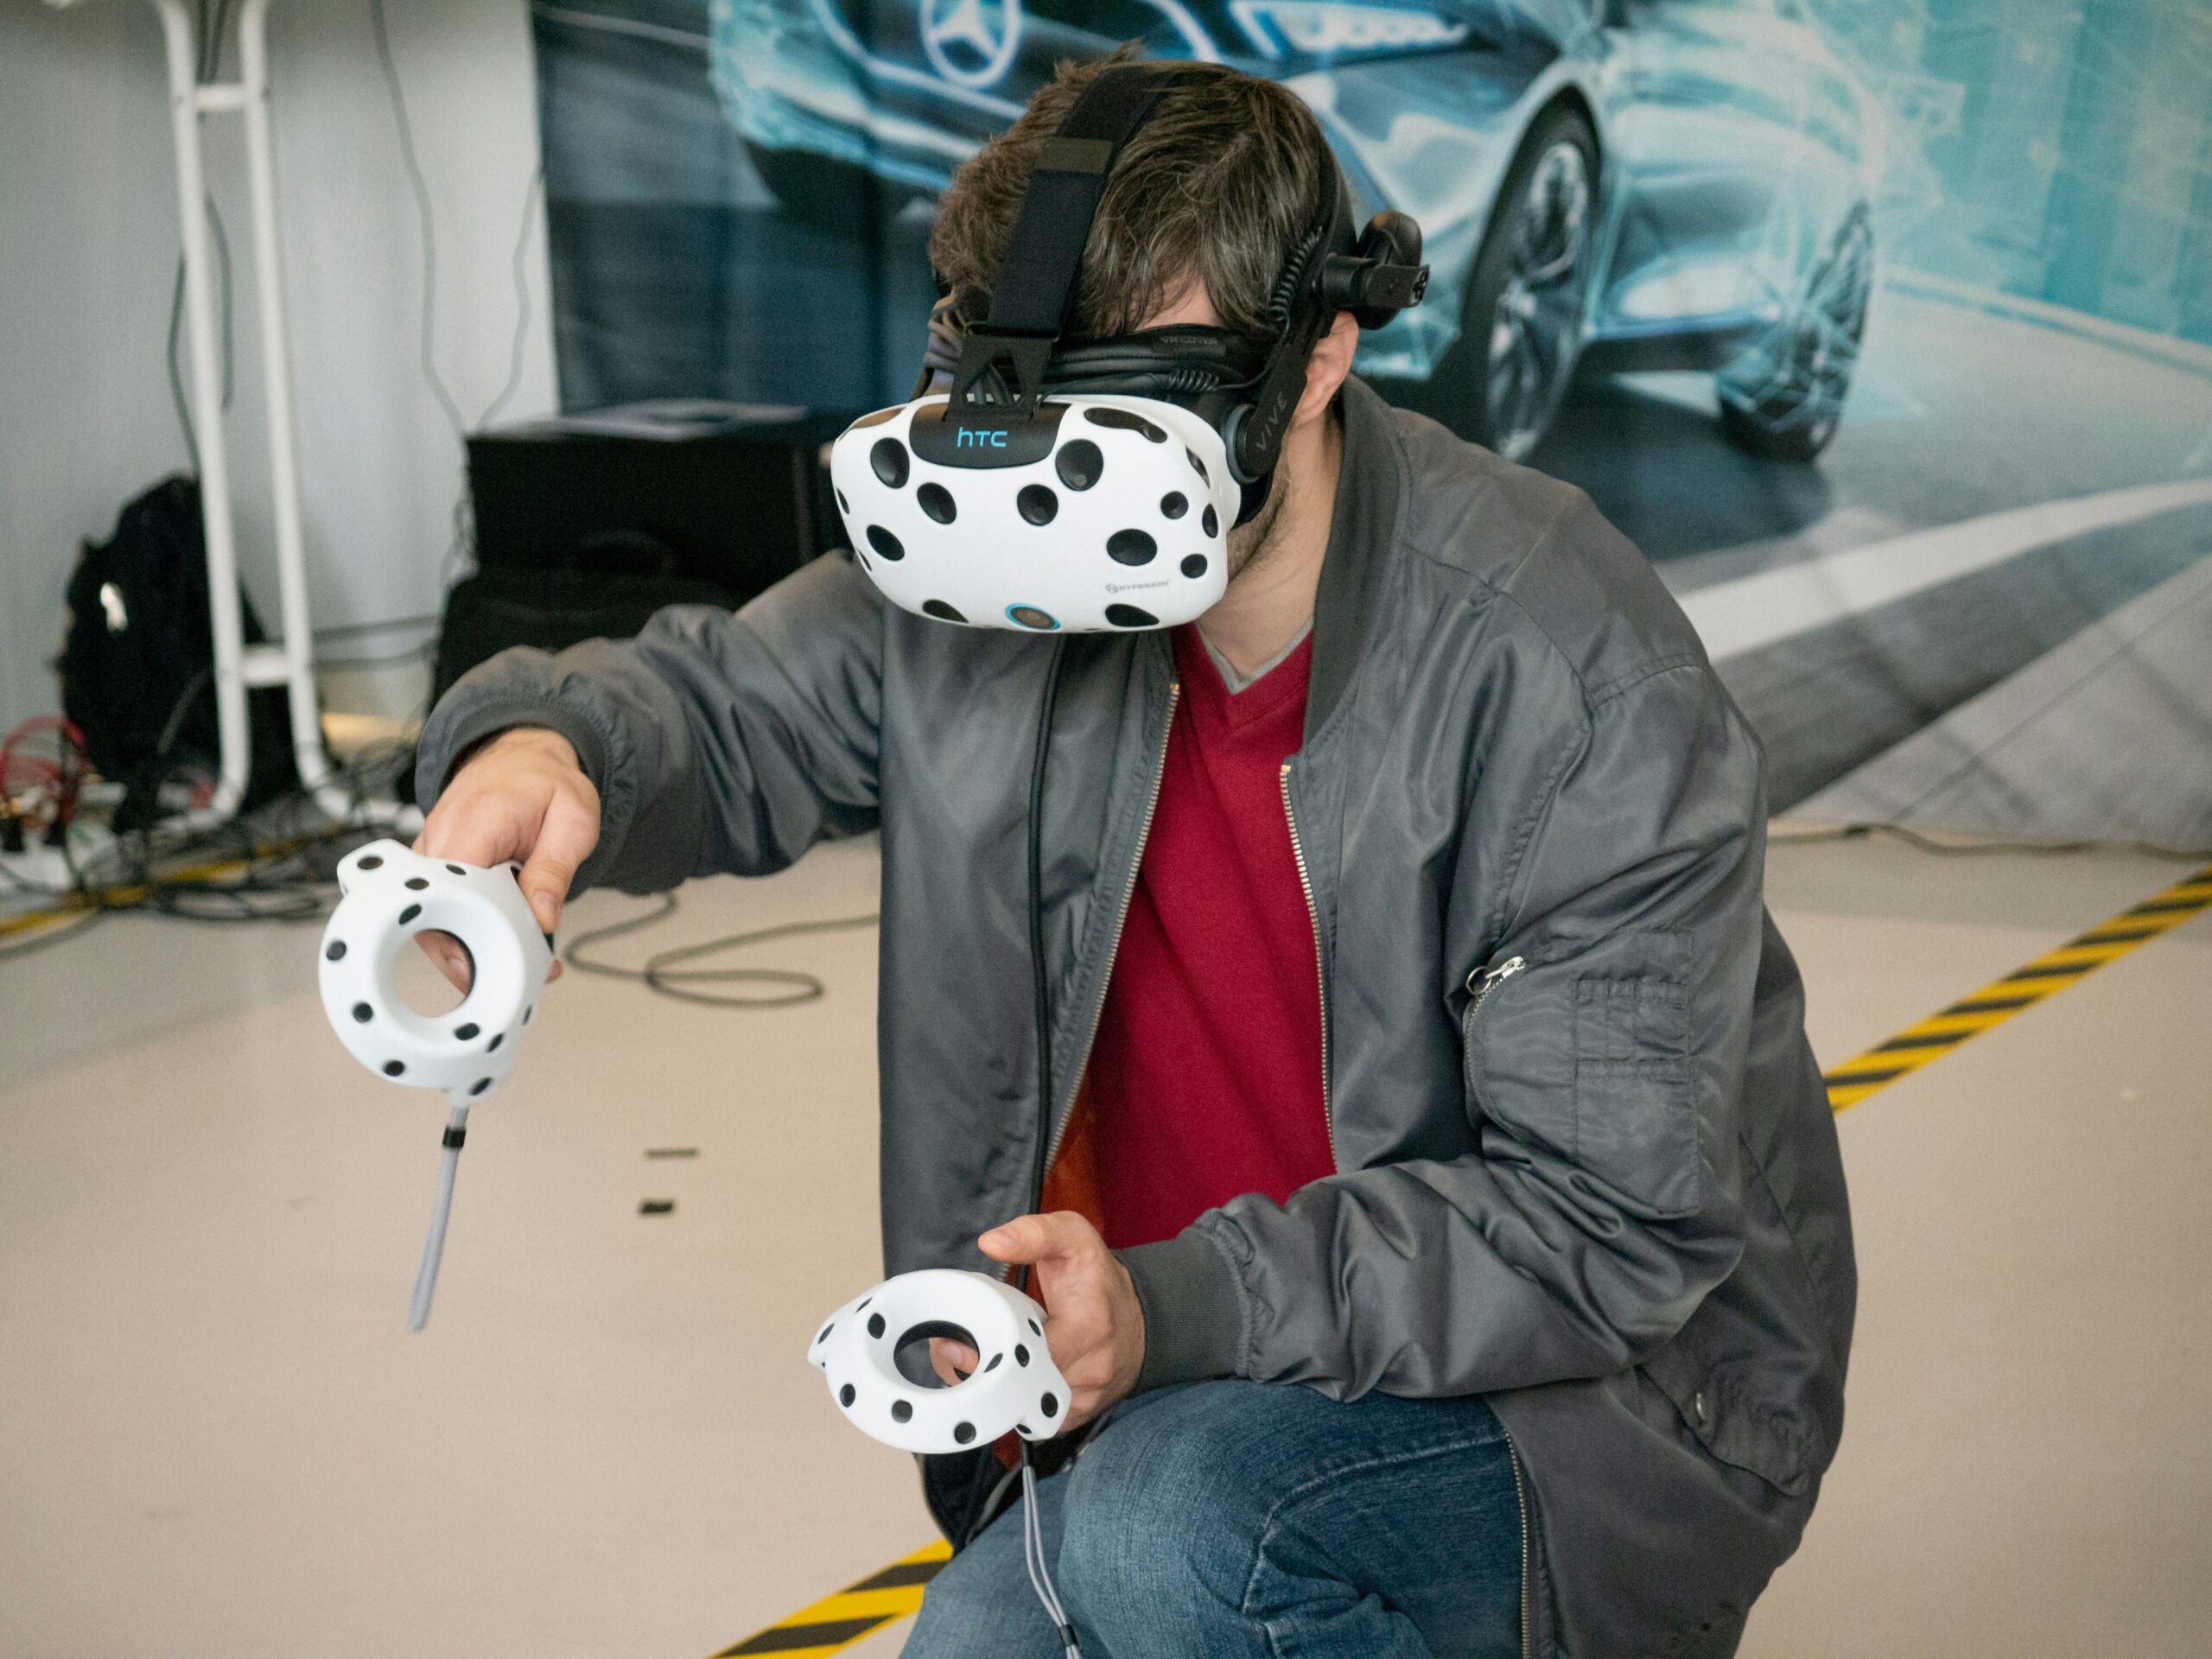 An individual immersed in virtual reality with a headset on is engaging in a virtual career simulation.